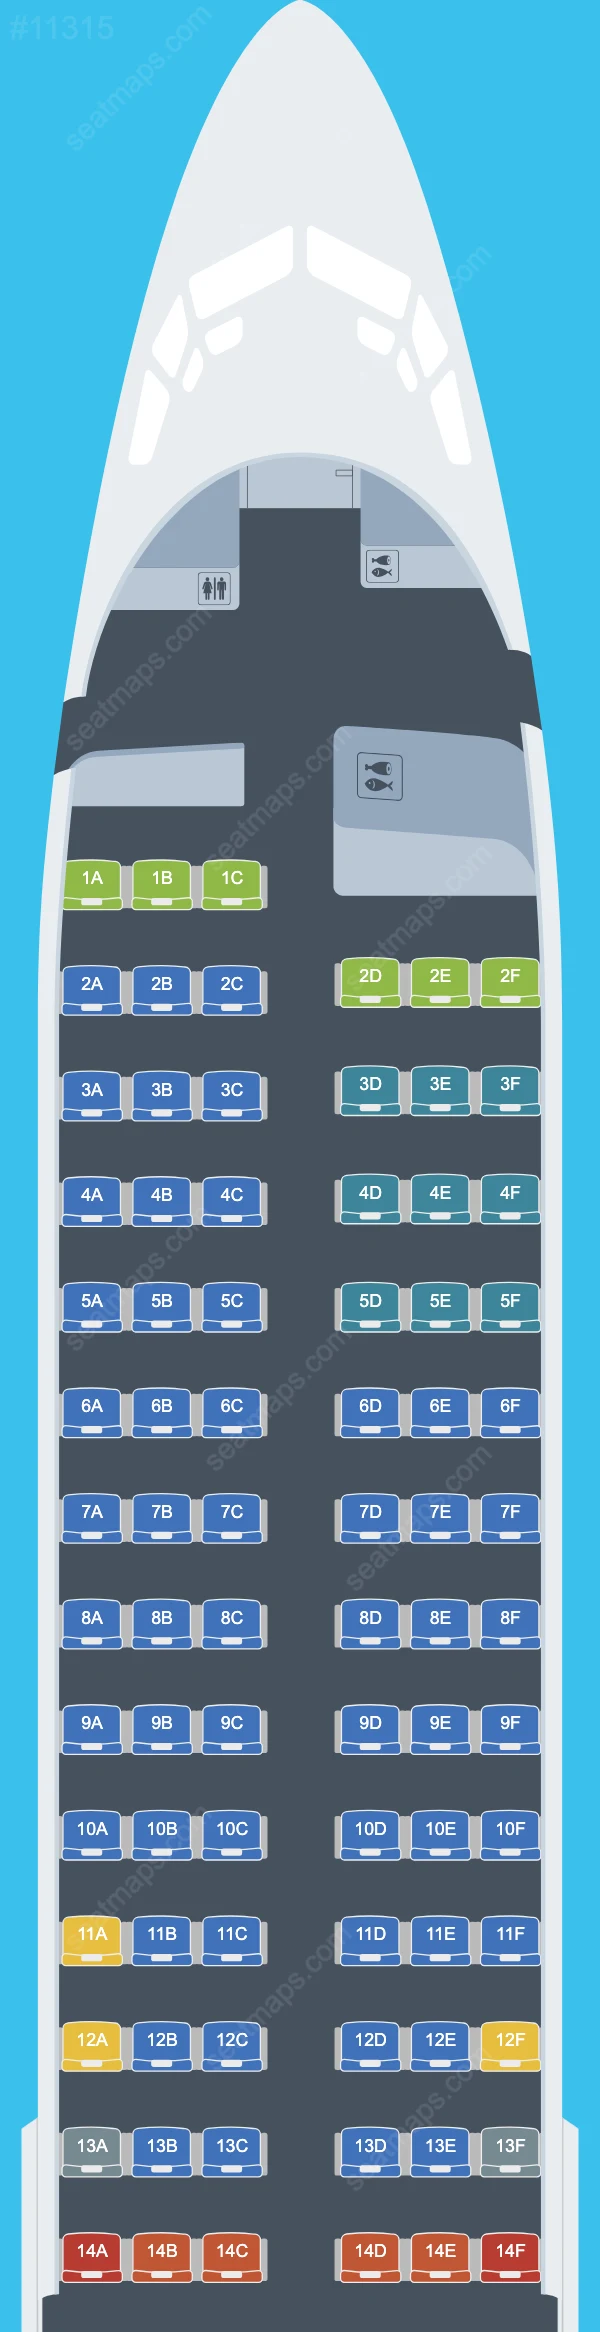 Jettime Boeing 737-800 aircraft seat map  737-800